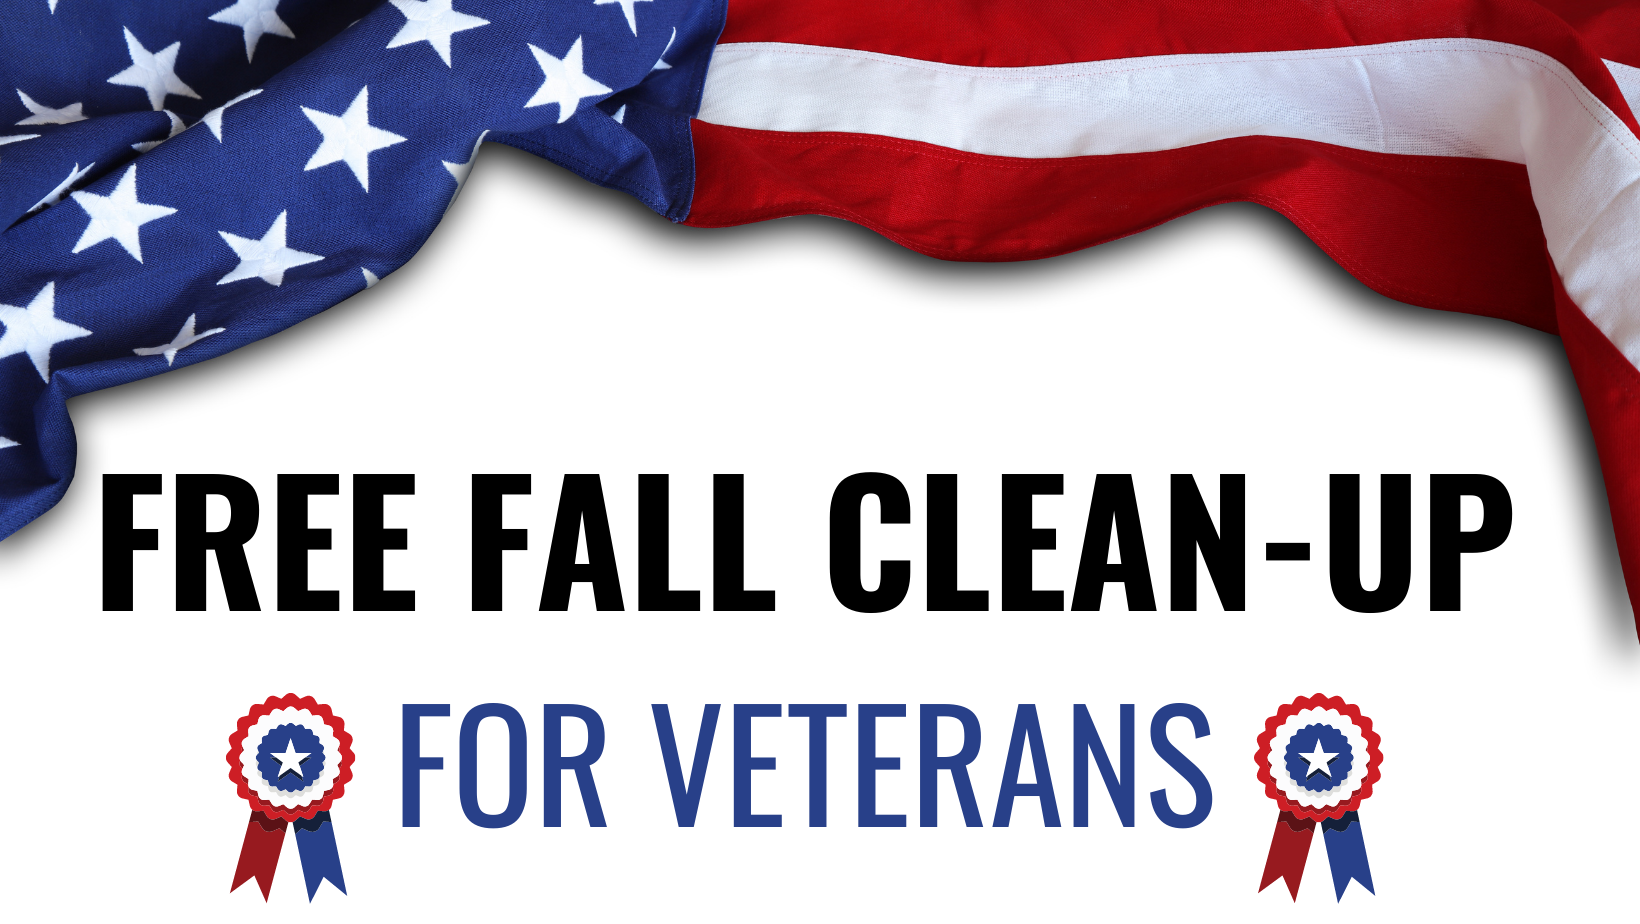 FREE FALL CLEAN-UP FOR VETERANS (1)